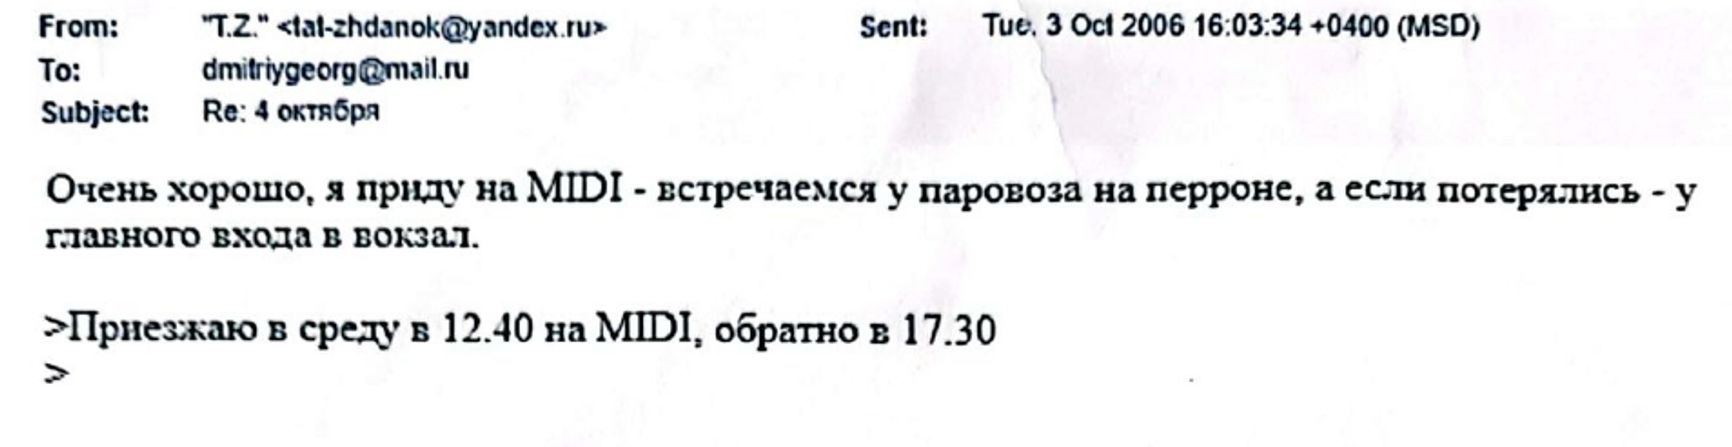 Email from Tatjana Ždanoka to her FSB handler Dmitry Gladey, dated October 3, 2006, arranging to meet at the Brussels South train station. 